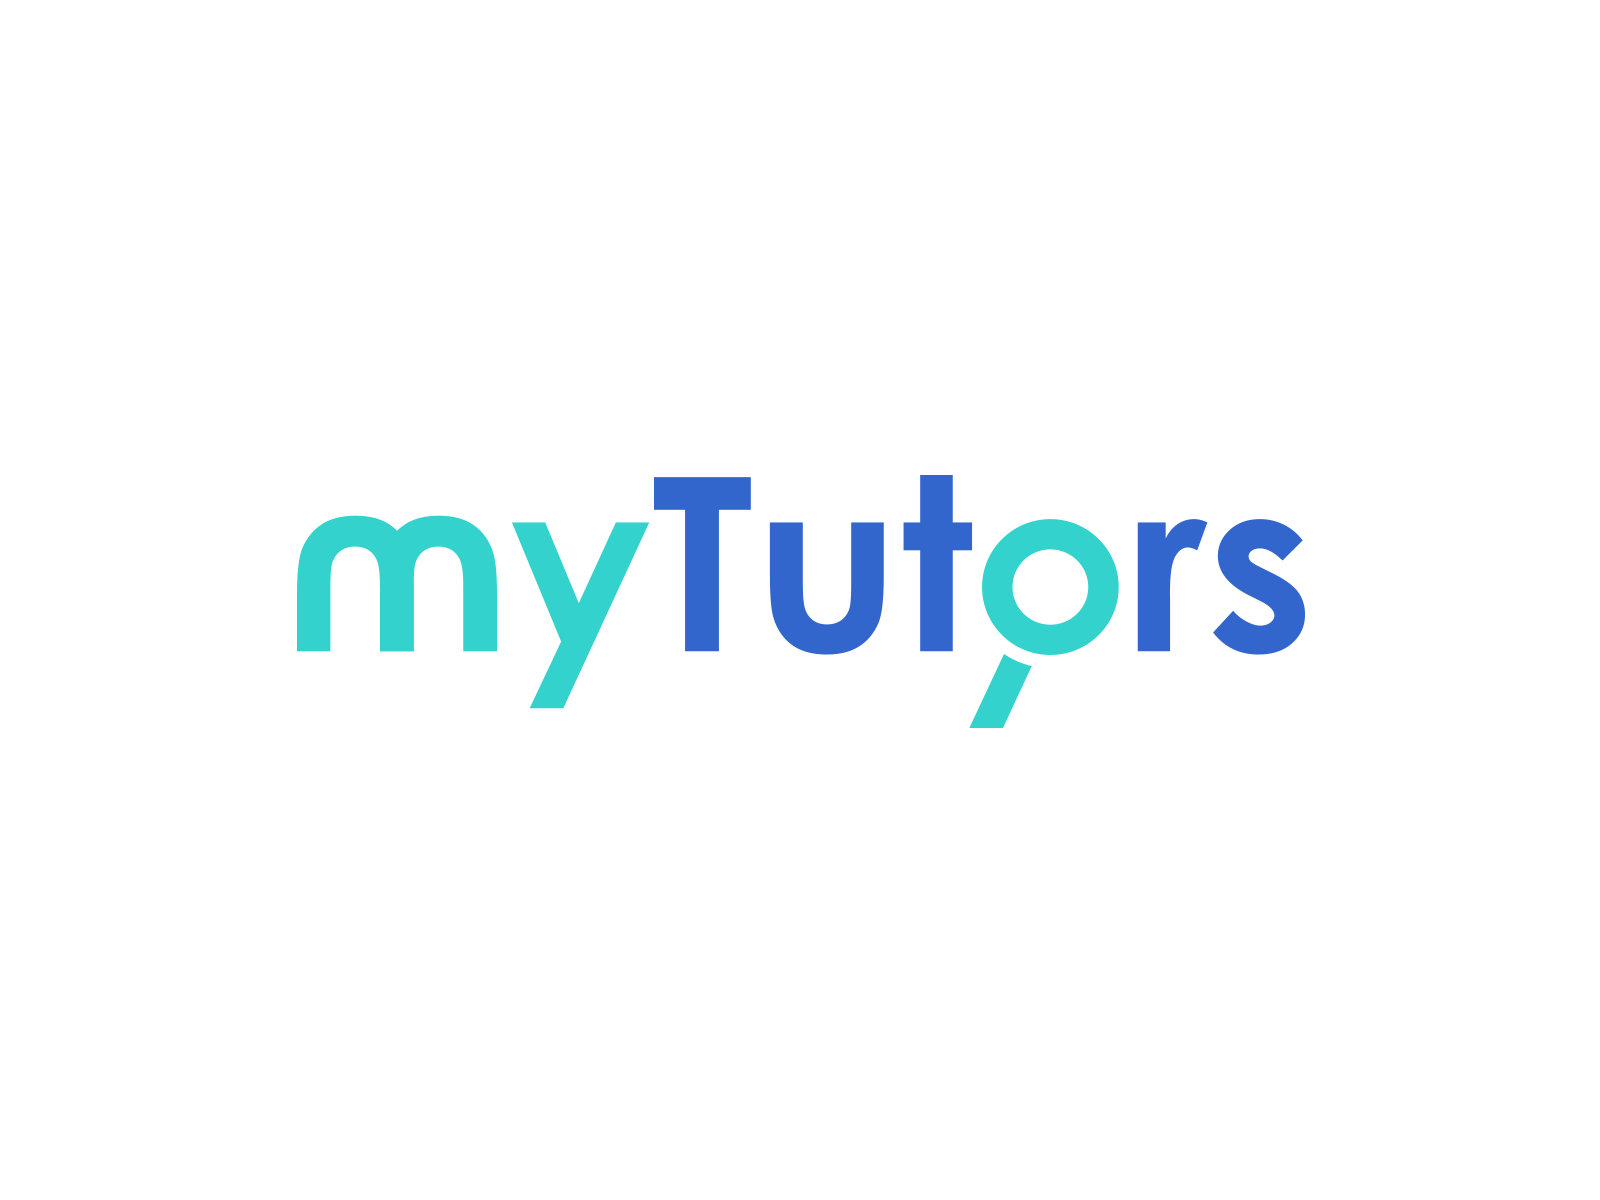 Tutoring Company Projects :: Photos, videos, logos, illustrations and  branding :: Behance